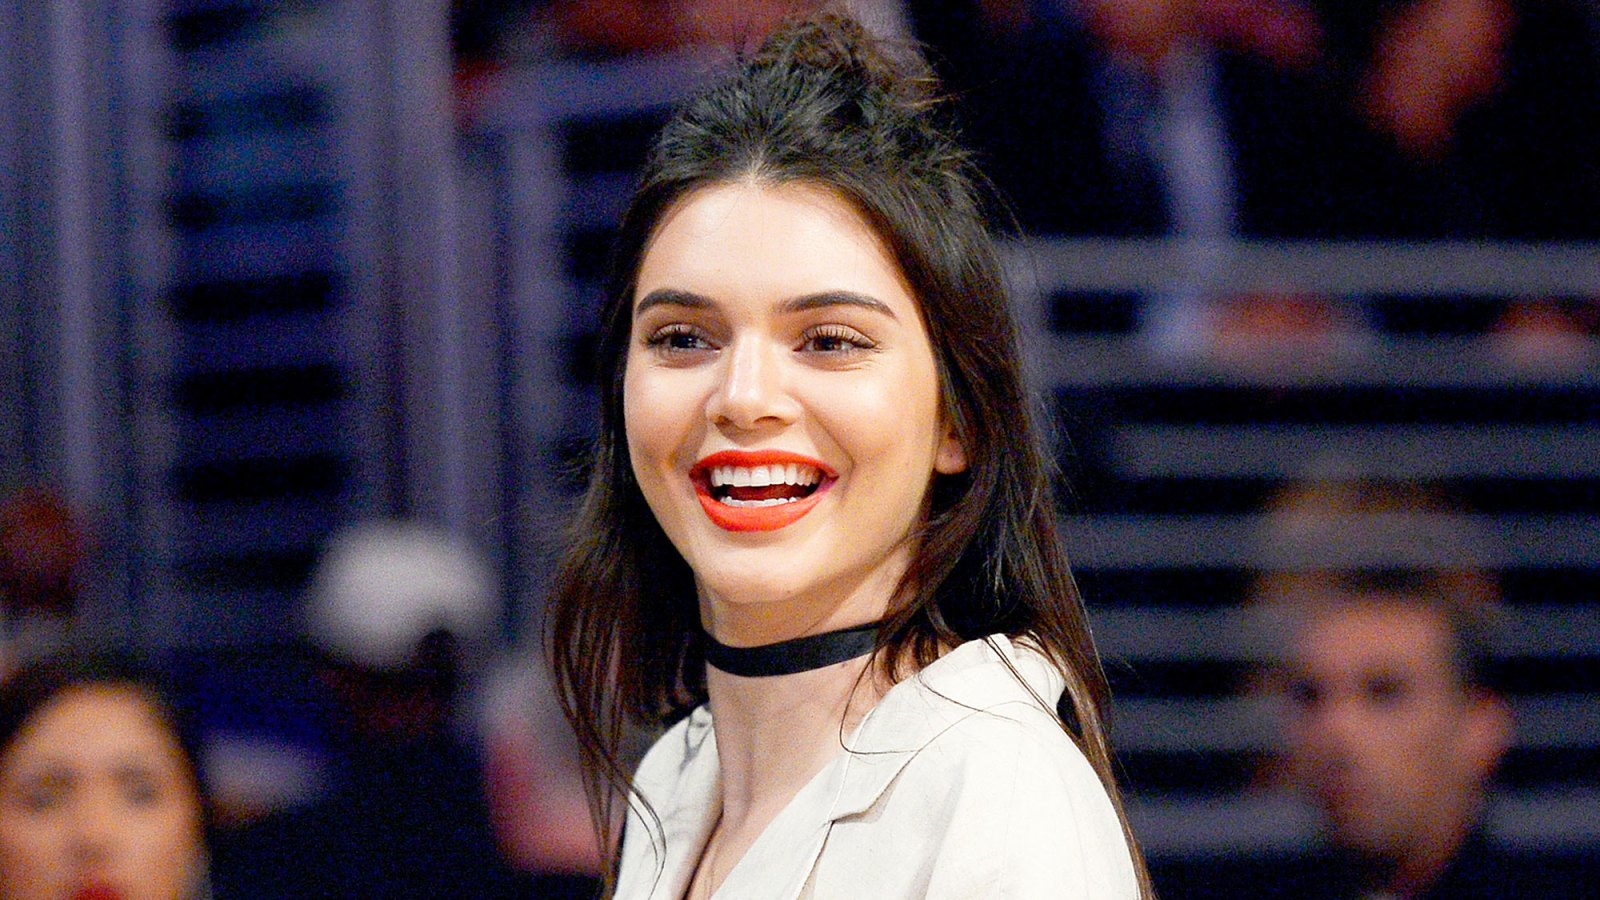 Kendall Jenner attends Los Angeles Lakers and Sacramento Kings basketball game at Staples Center March 15, 2016, in Los Angeles, California.